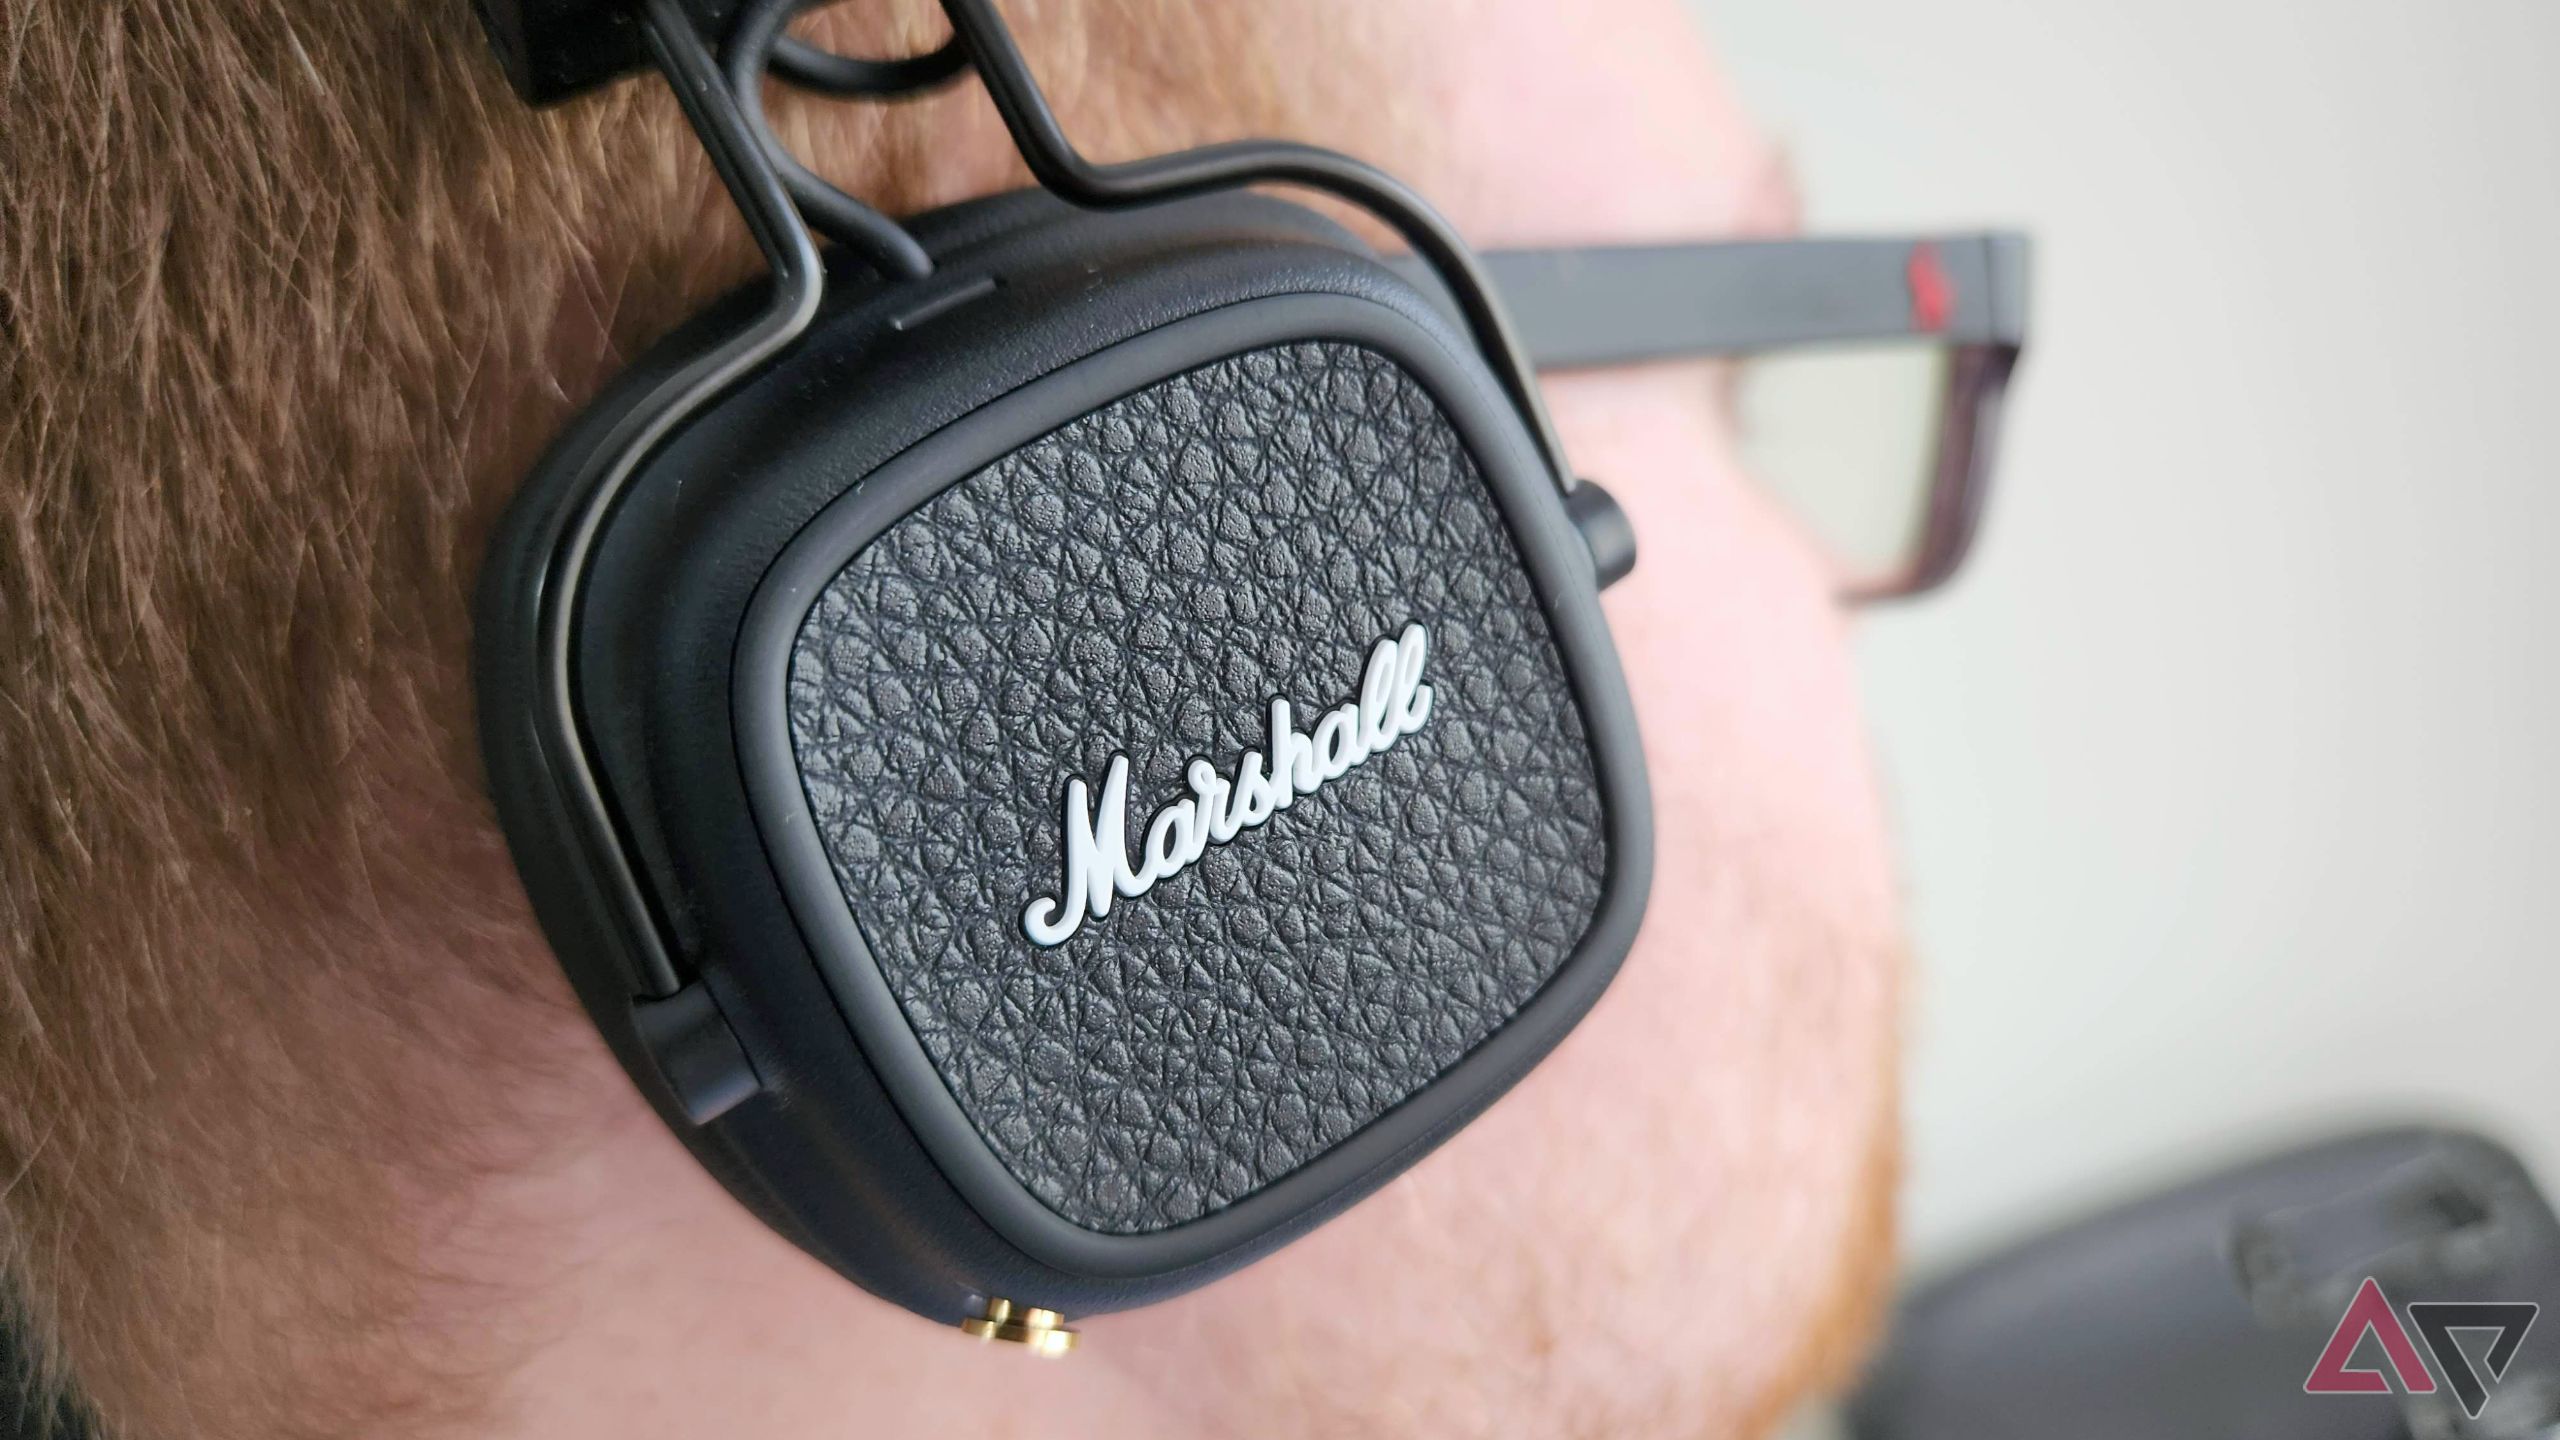 A close up side view of the Marshall Major V headphones while listening to music